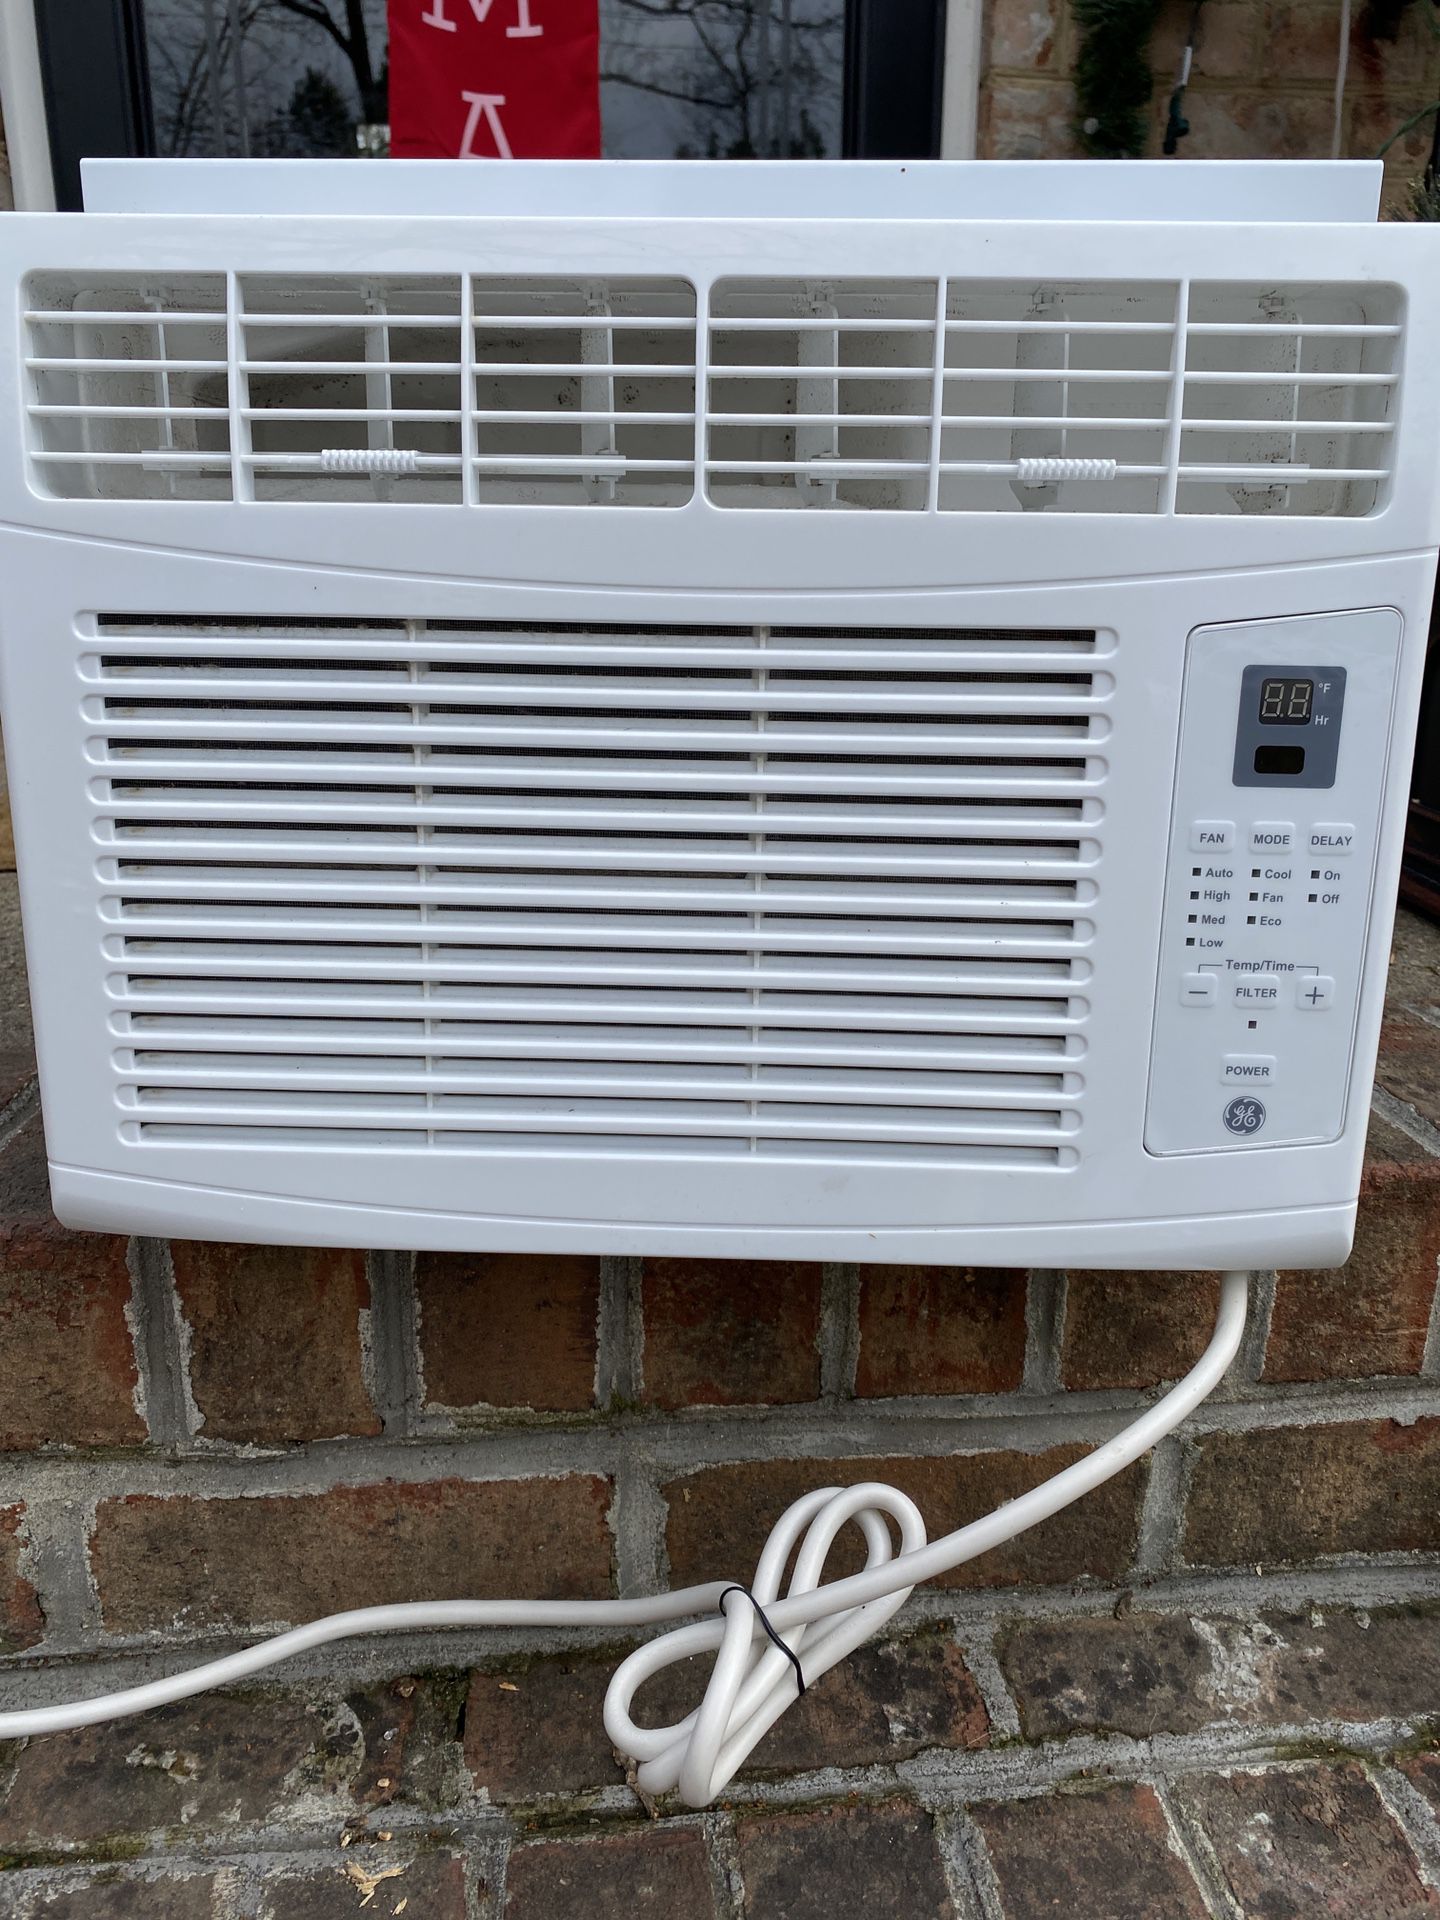 FREE Window AC Unit, Works Great, About 6 Months Old